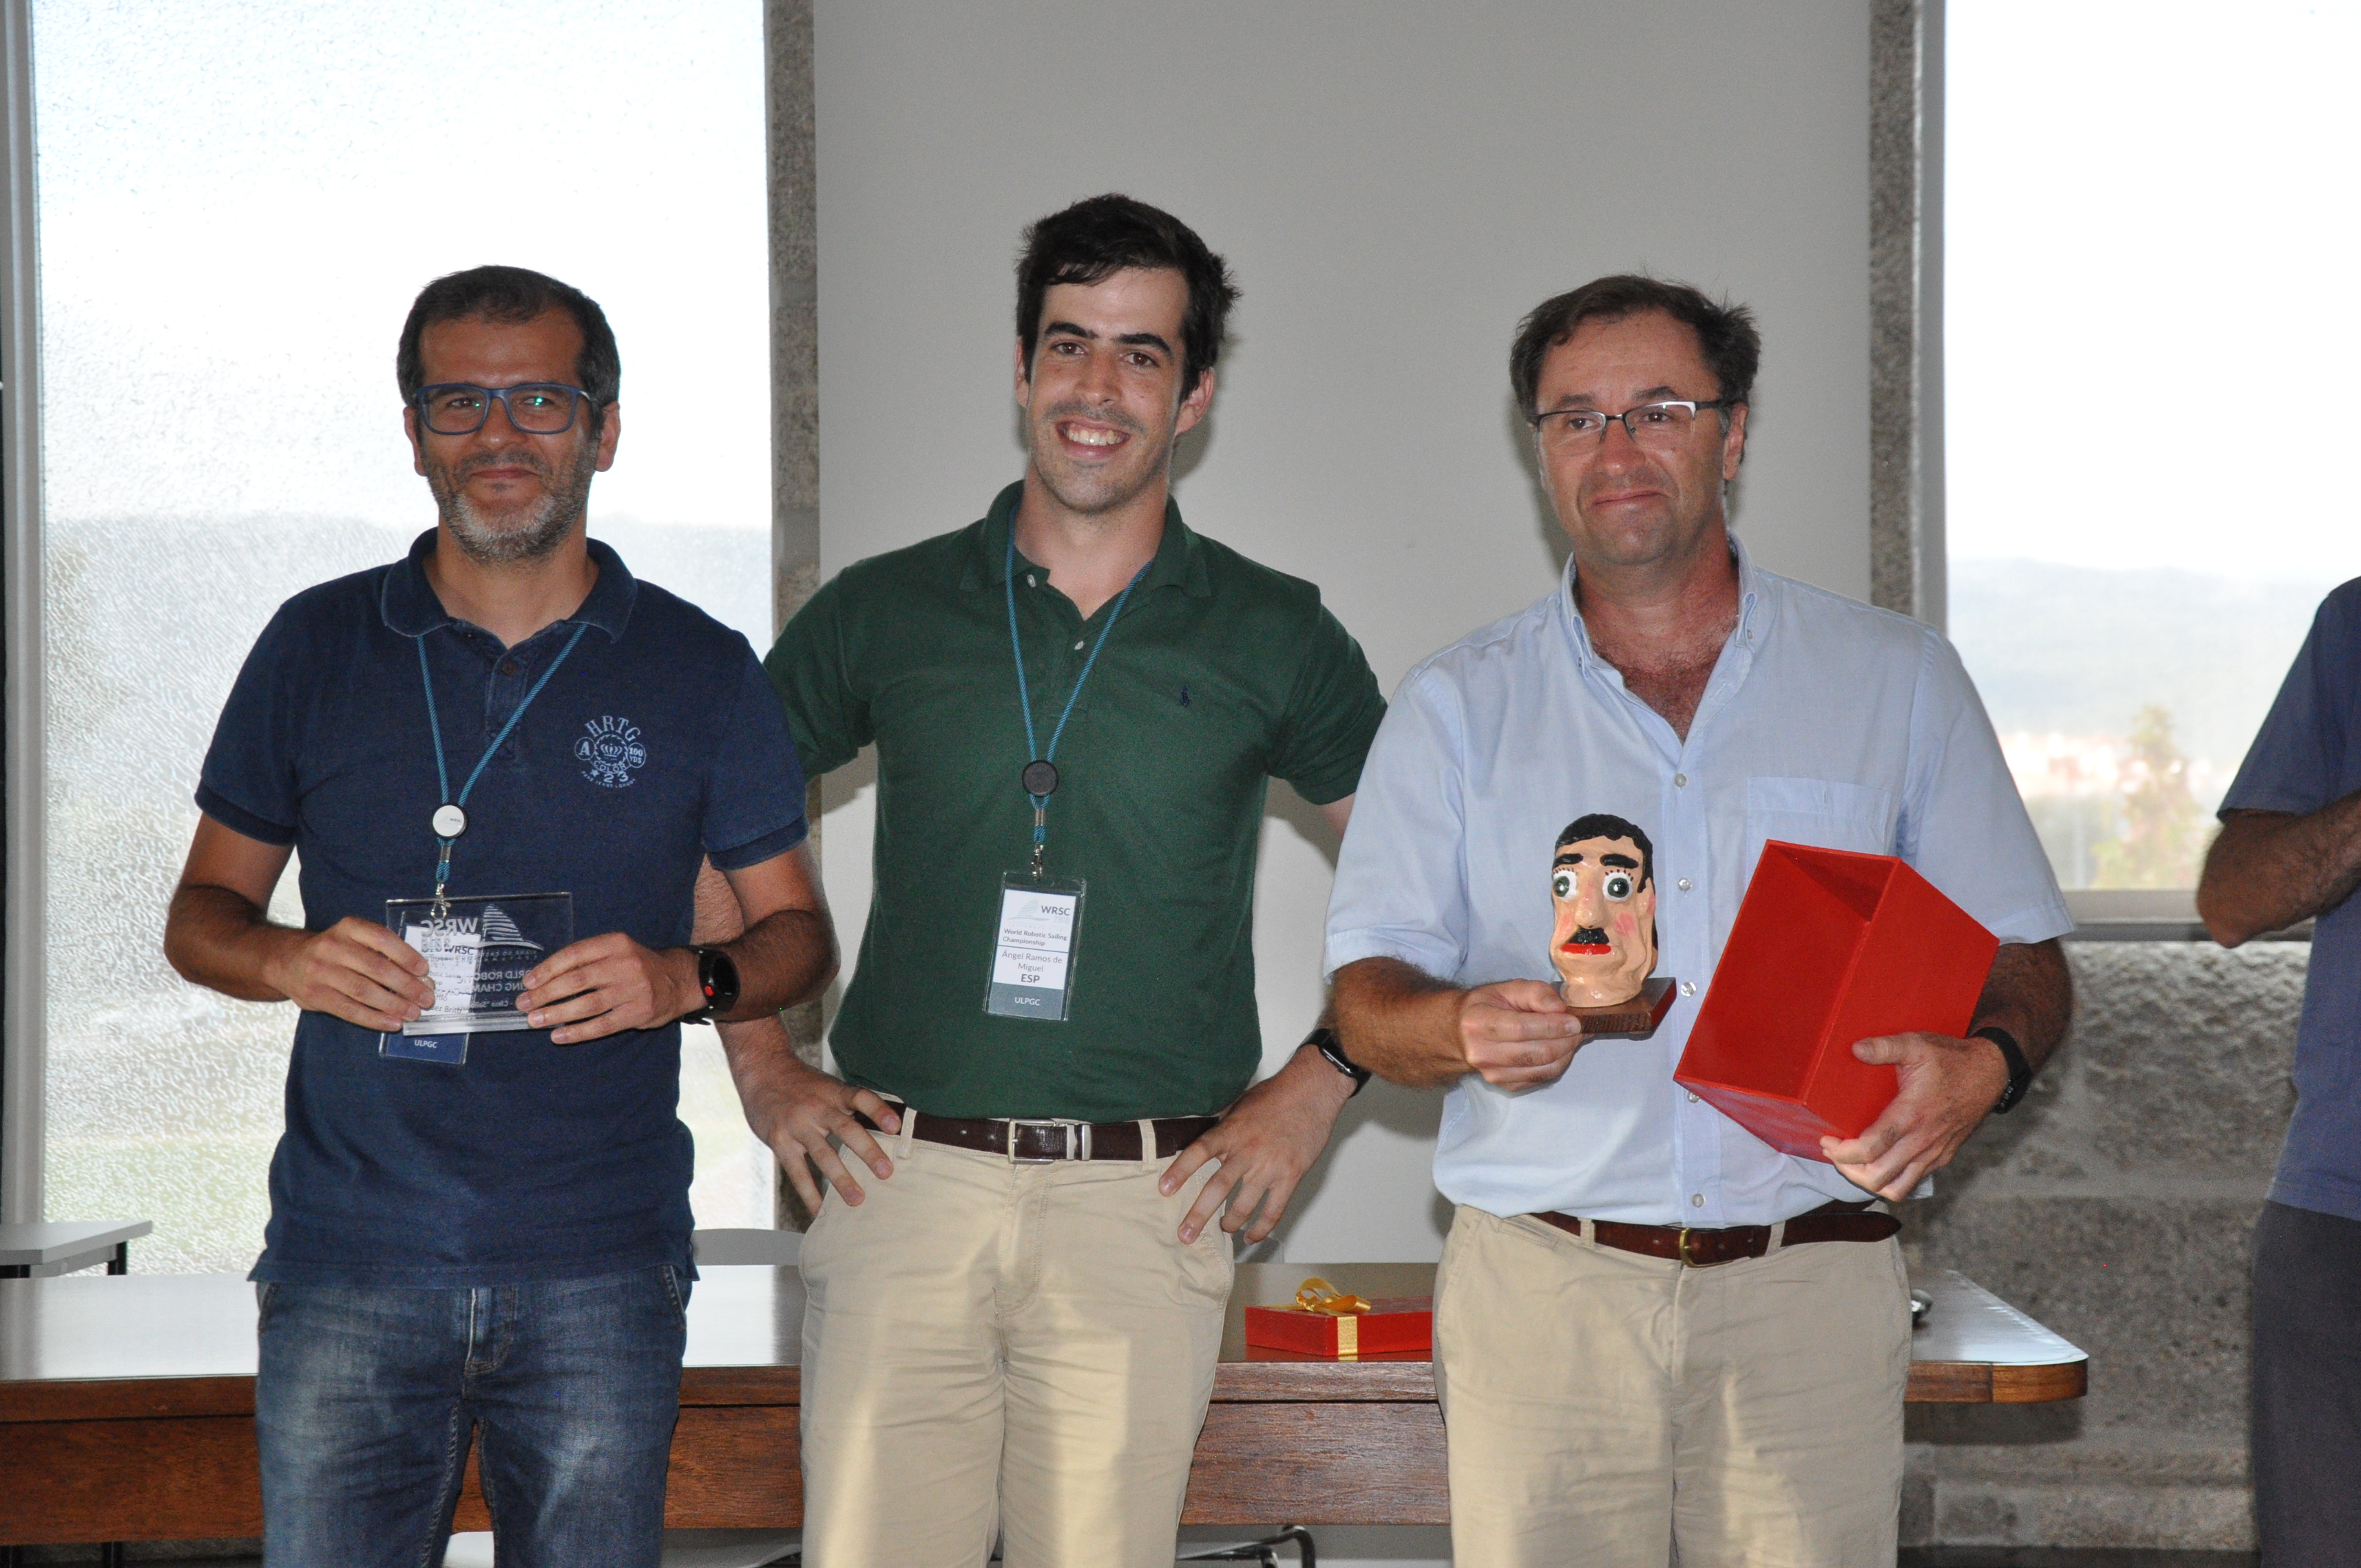 First Prize for the A-Tirma at the WRSC'2016